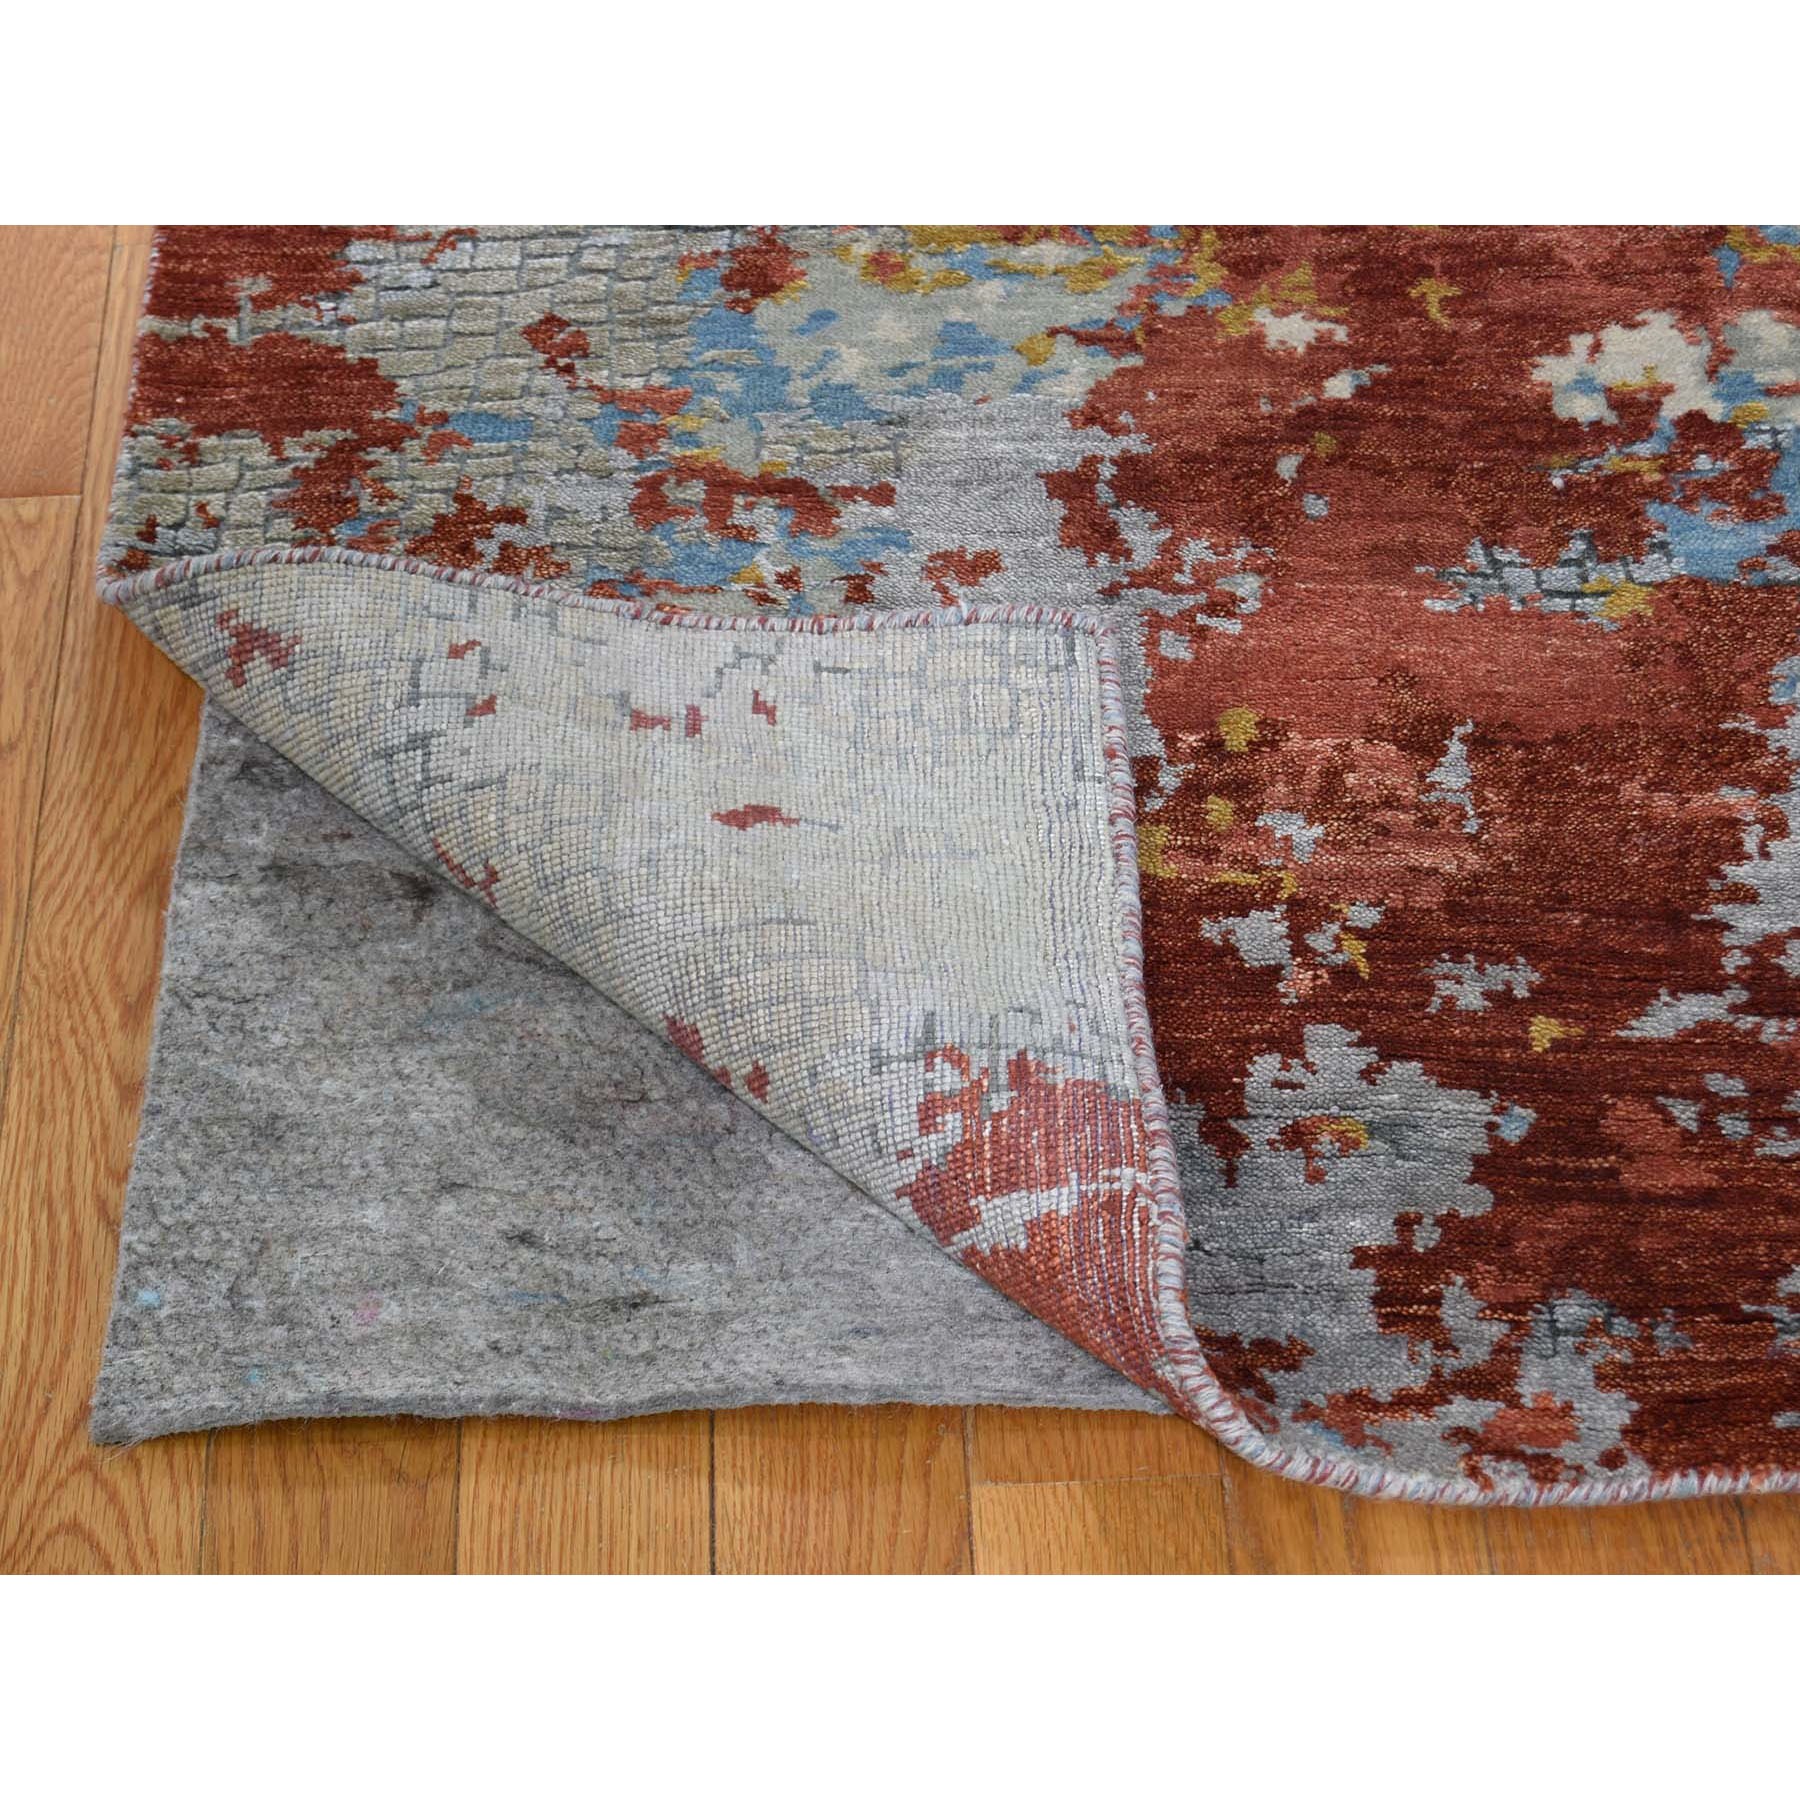 8-x9-10  Wool And Silk Abstract With Fire Mosaic Design Hand Knotted Oriental Rug 